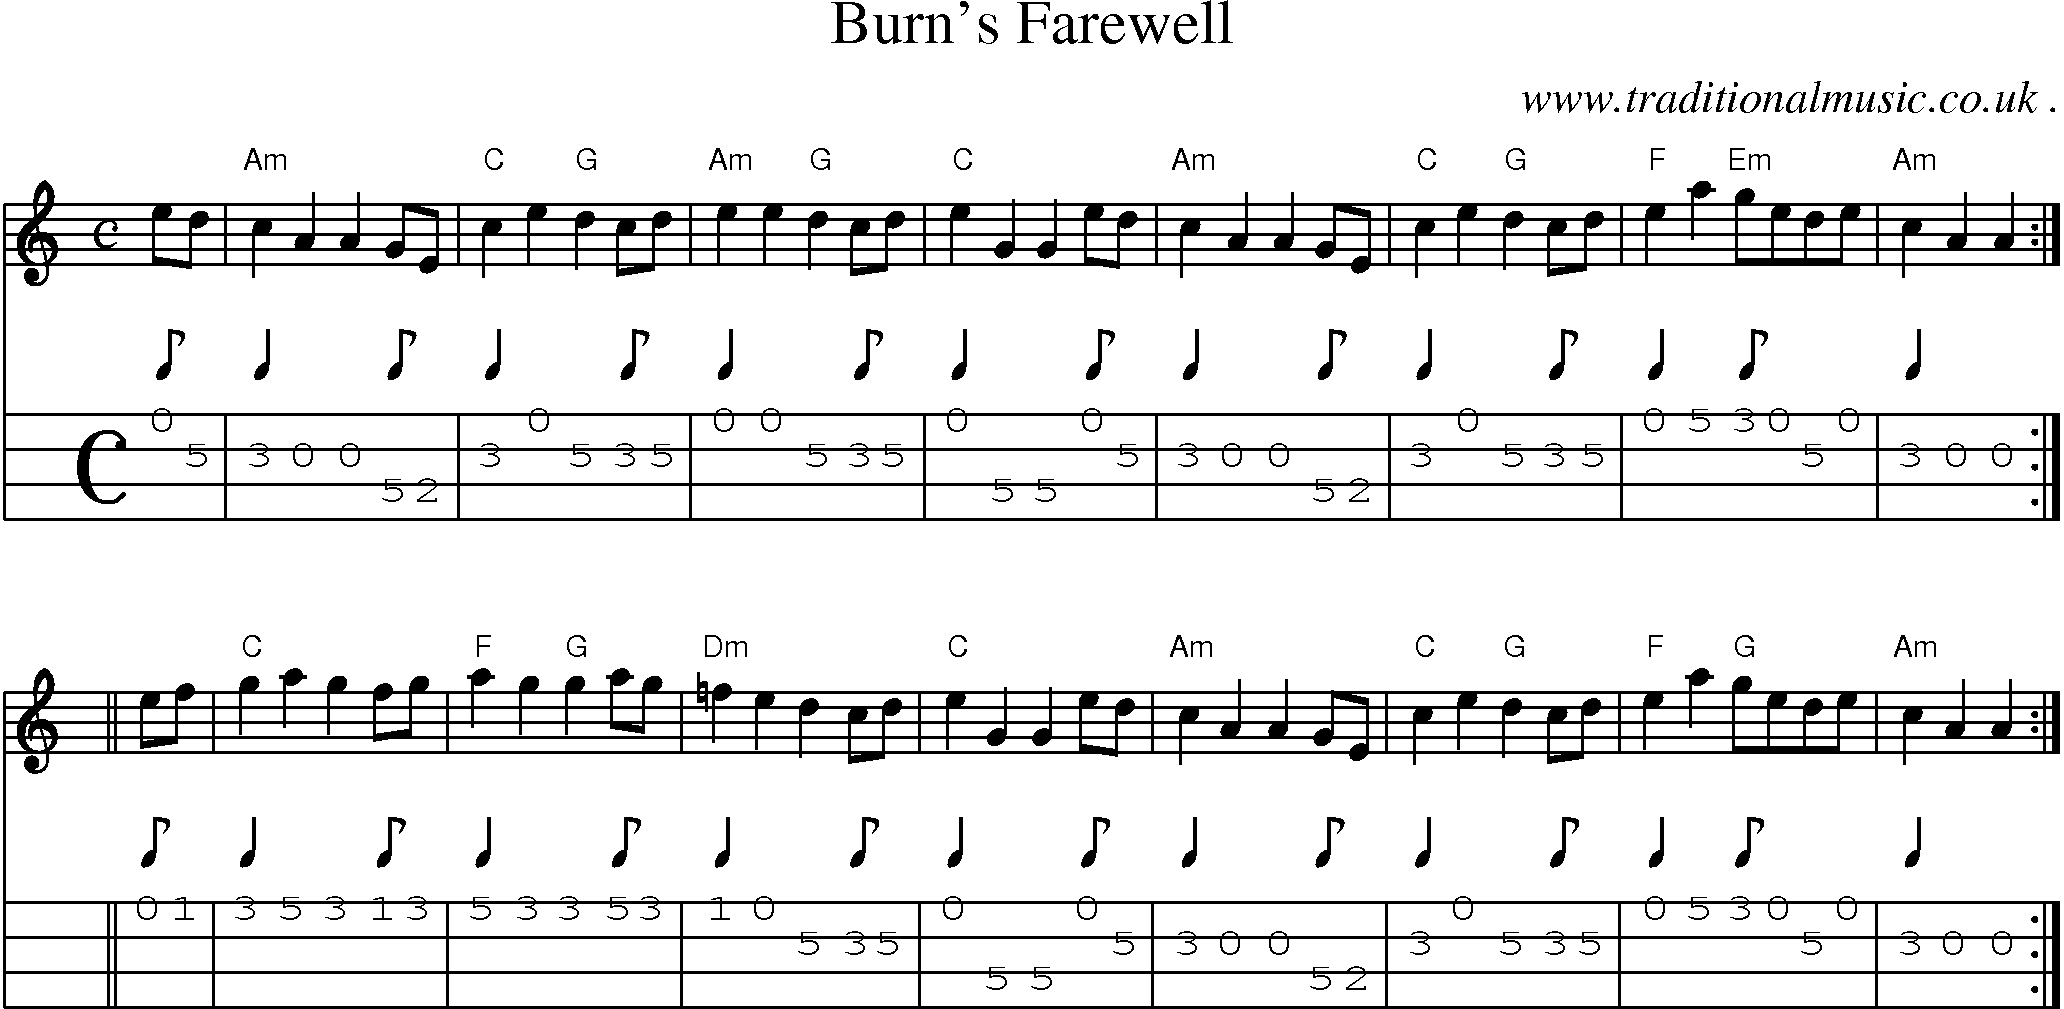 Music Score and Guitar Tabs for Burns Farewell